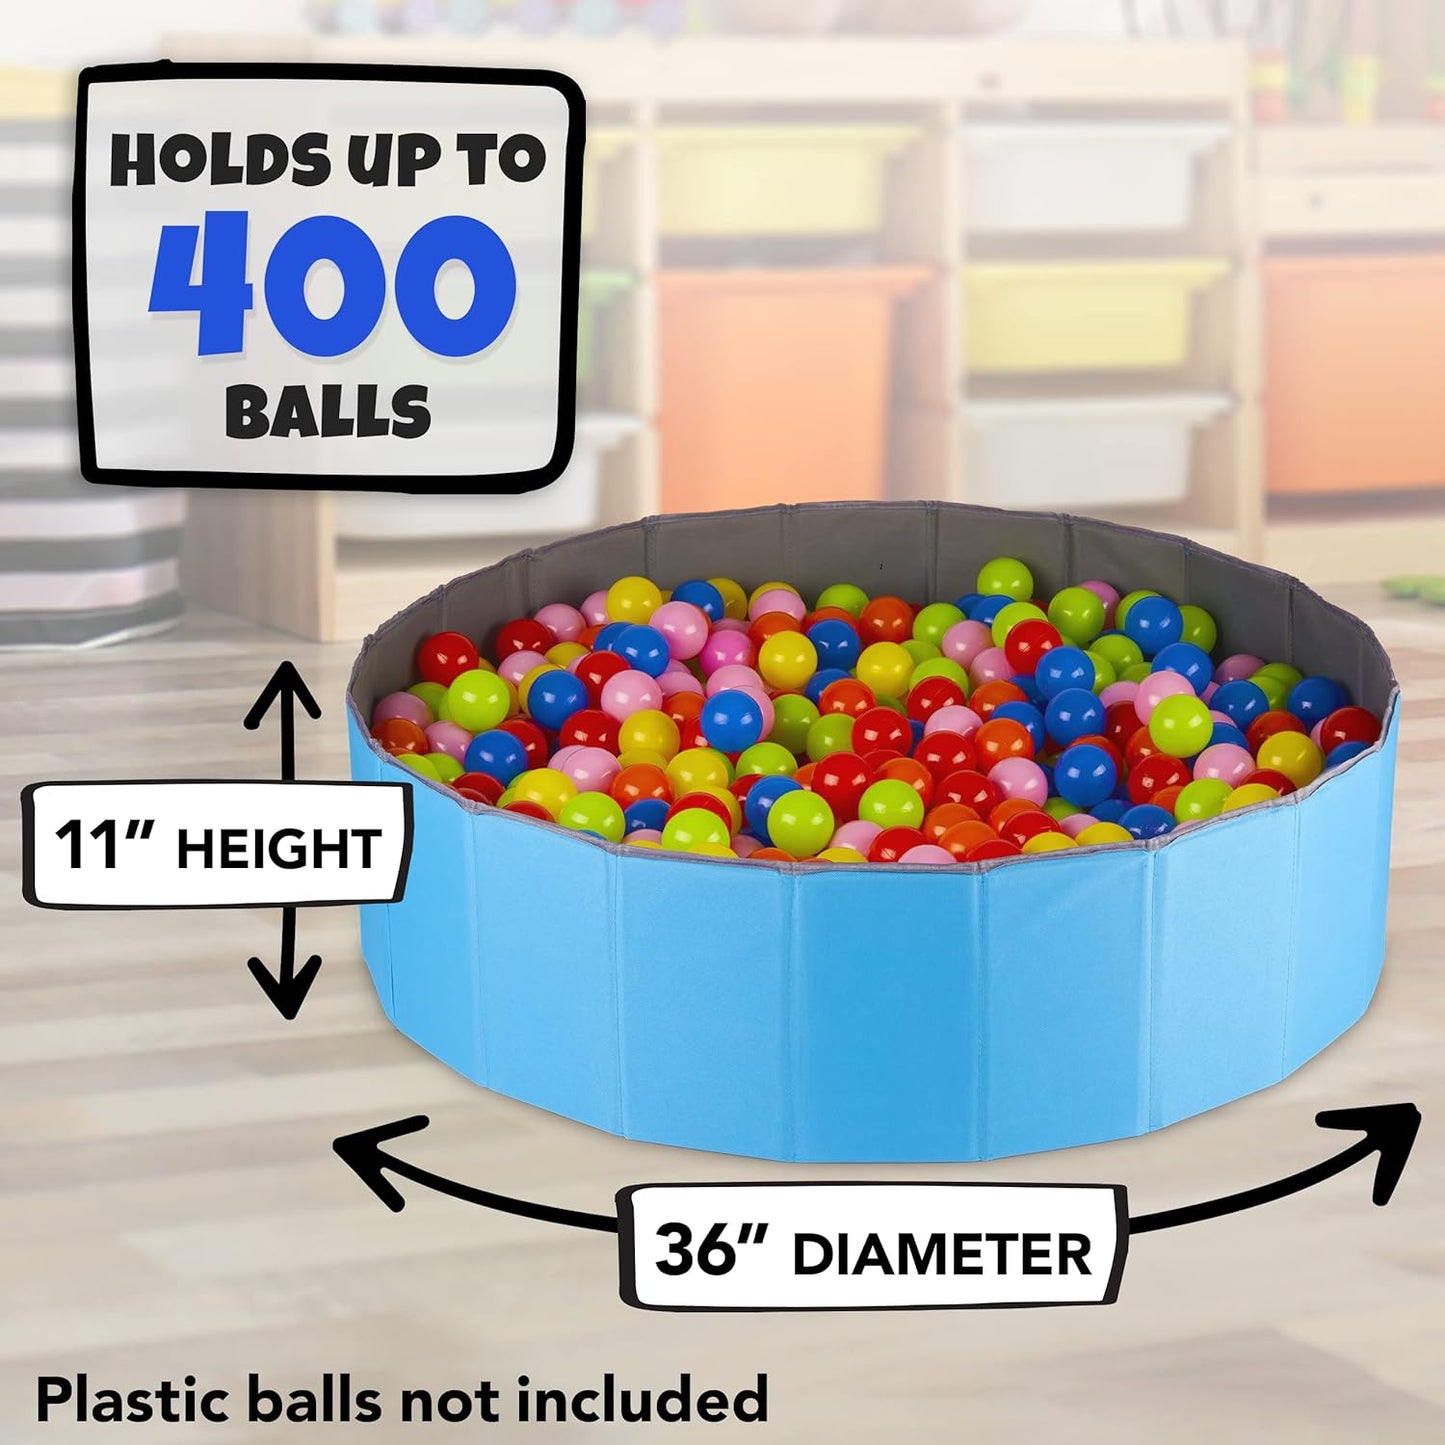 Ball Pit for Toddlers and Kids, Holds over 400 Balls, Soft, Foldable, Reusable Storage Bag Is Included, for Indoor or Outdoor Use, Blue